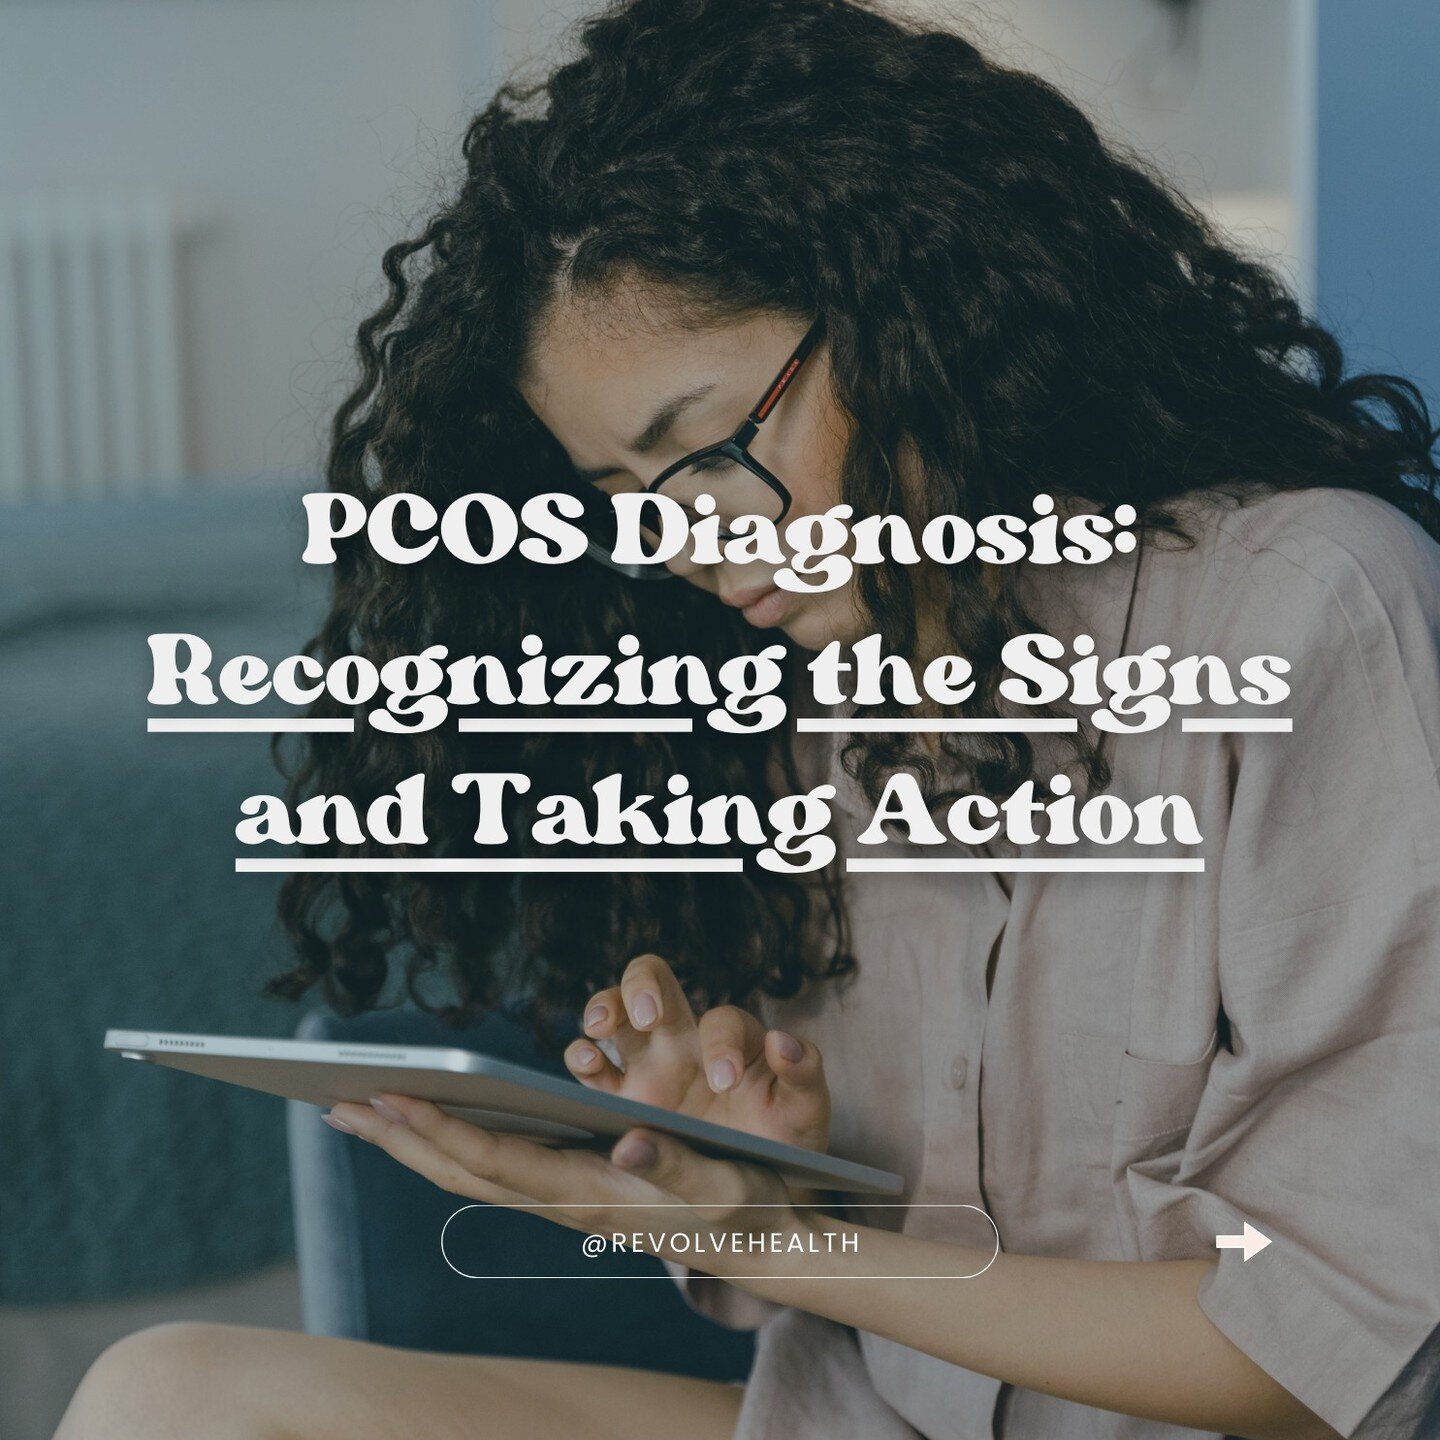 Unlock the Secrets of PCOS: Discover Signs, Solutions, and Your Path to Wellness! 🌿 Don't miss out on our comprehensive guide to recognizing PCOS symptoms and taking empowered action. Read the full blog now.⁠
⁠
Link in bio.⁠
⁠
⁠
🌱⁠
.⁠
.⁠
.⁠
.⁠
.⁠
#